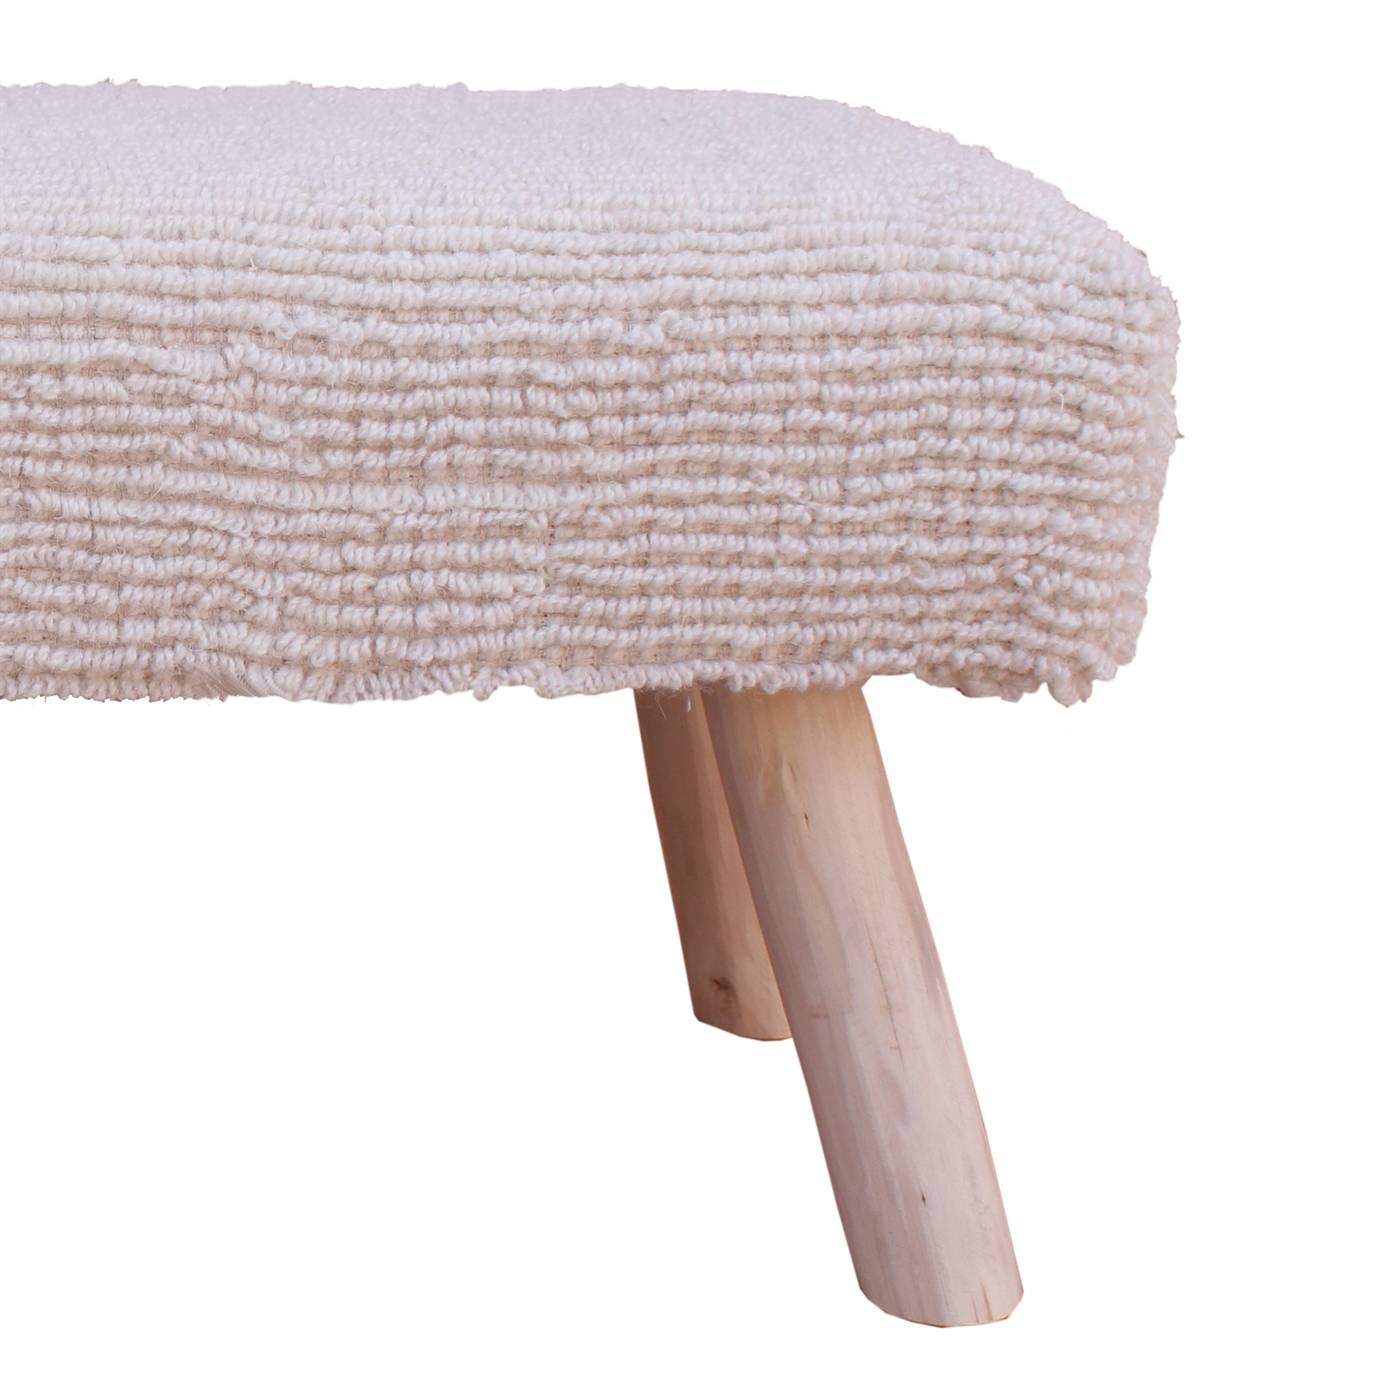 Burliegh Bench, 80x30x40 cm, Natural White, Wool, Hand Woven, Handwoven, All Loop